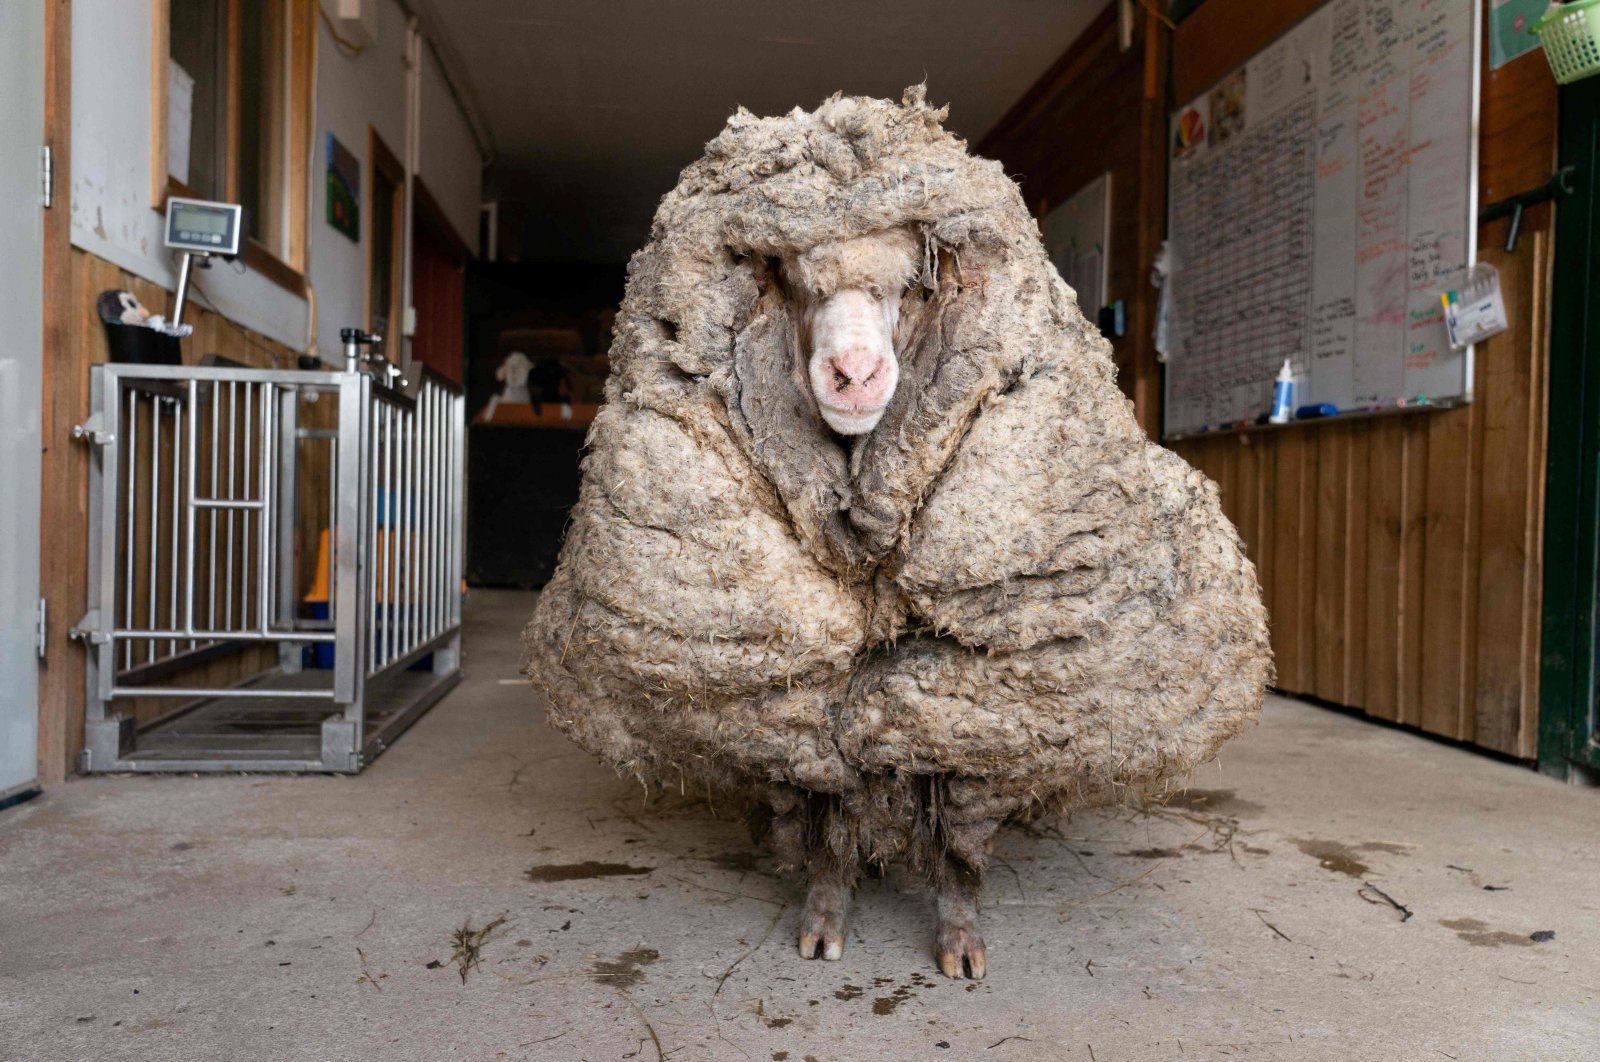 "Baarack", a wild sheep who was found with a huge 35-kilogram (77 lbs.) coat, can be seen at Edgar's Mission Farm Sanctuary in Lancefield, Victoria state, Feb. 25, 2021. (Edgar’s Mission Handout via AFP)